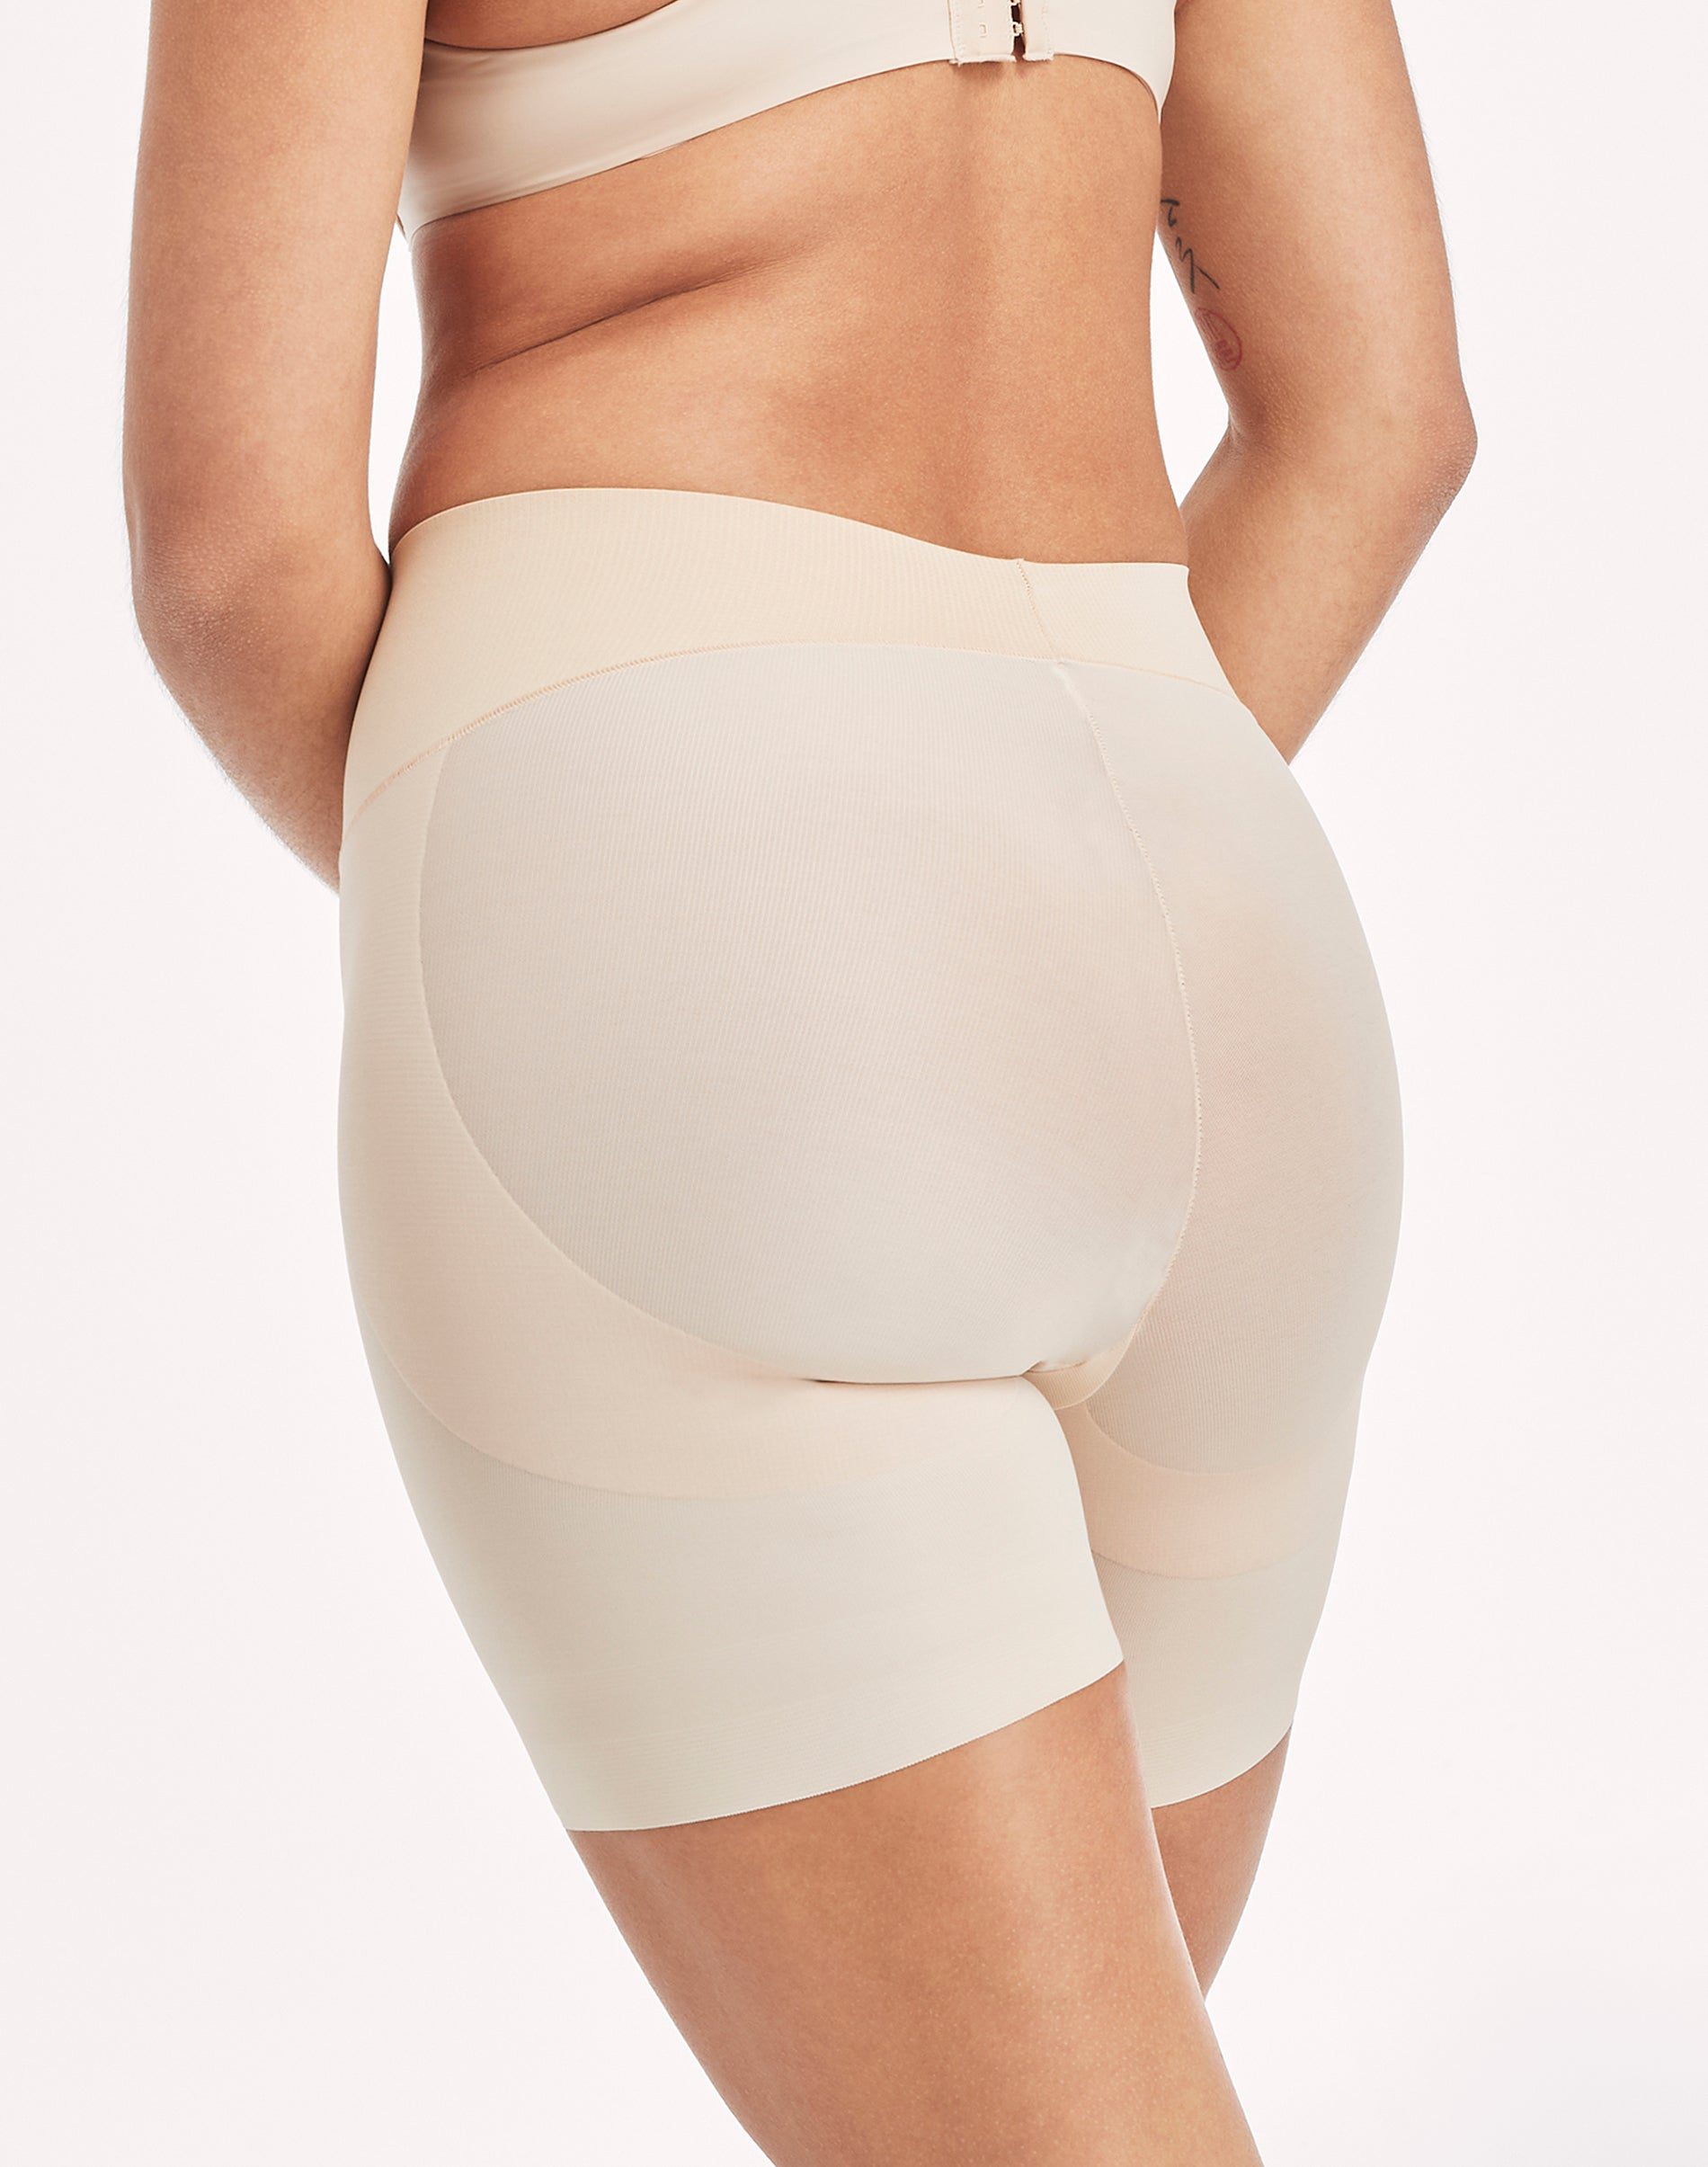 Frehsky shapewear for women tummy control Shapewear Shorts For Women Tummy  Control Boyshorts High Waisted Body Shaper Shorts Thigh Slimmer White